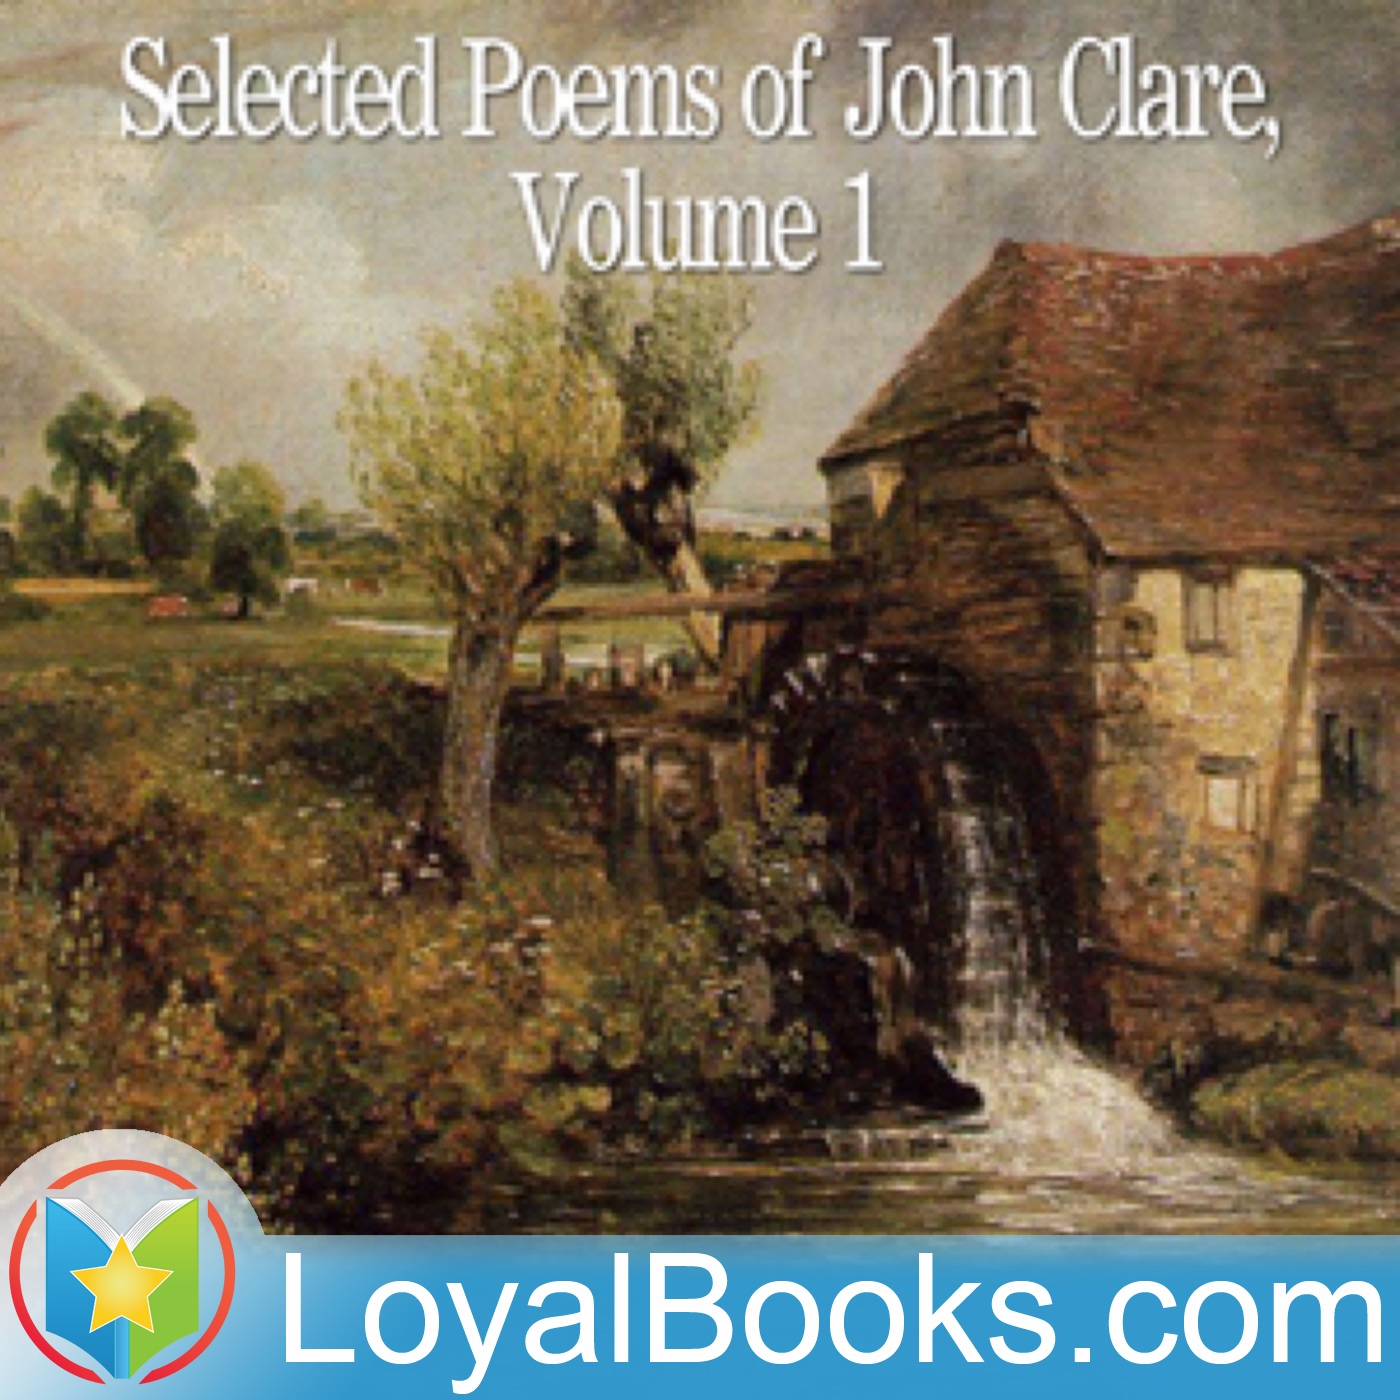 Selected Poems of John Clare by John Clare